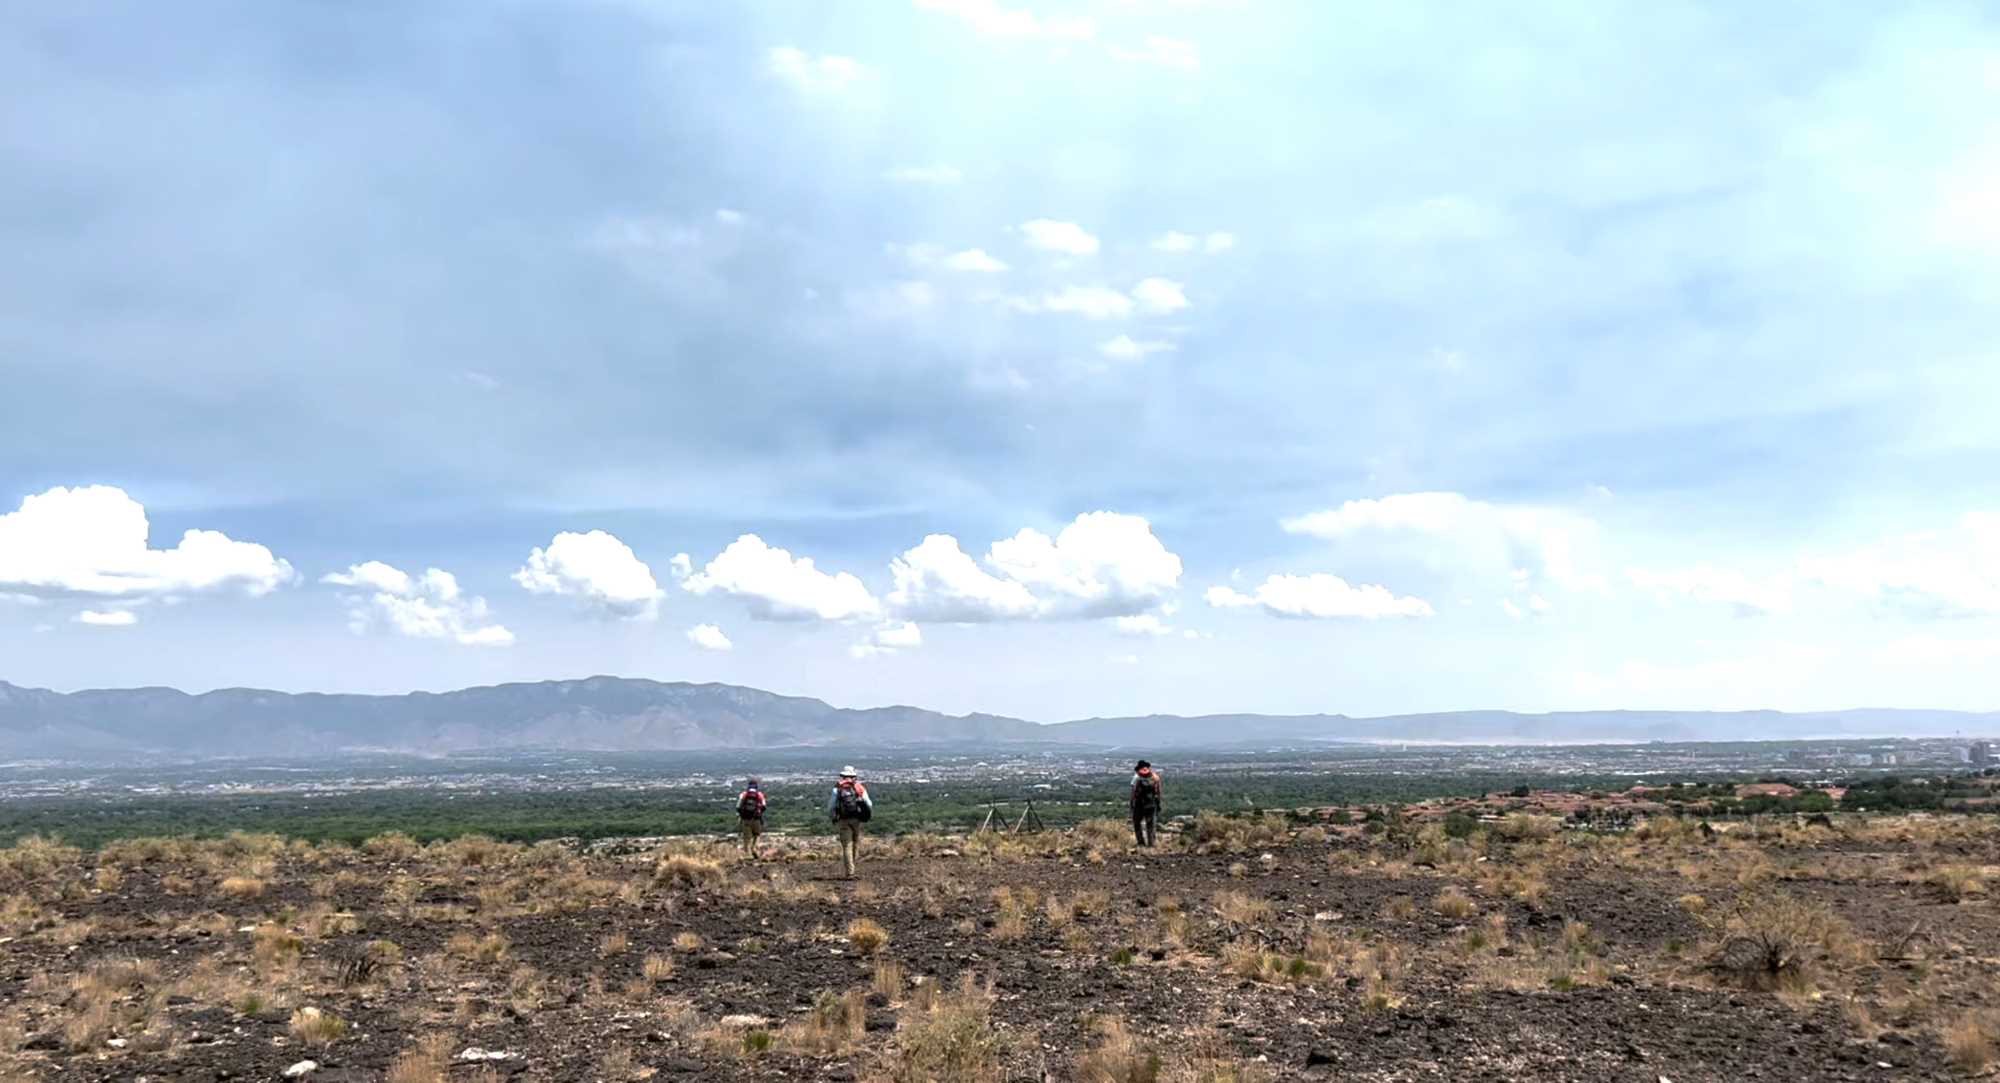 View to the east, showing the Archaeology Southwest crew conducting reconnaissance work on the Petroglyph National Monument.